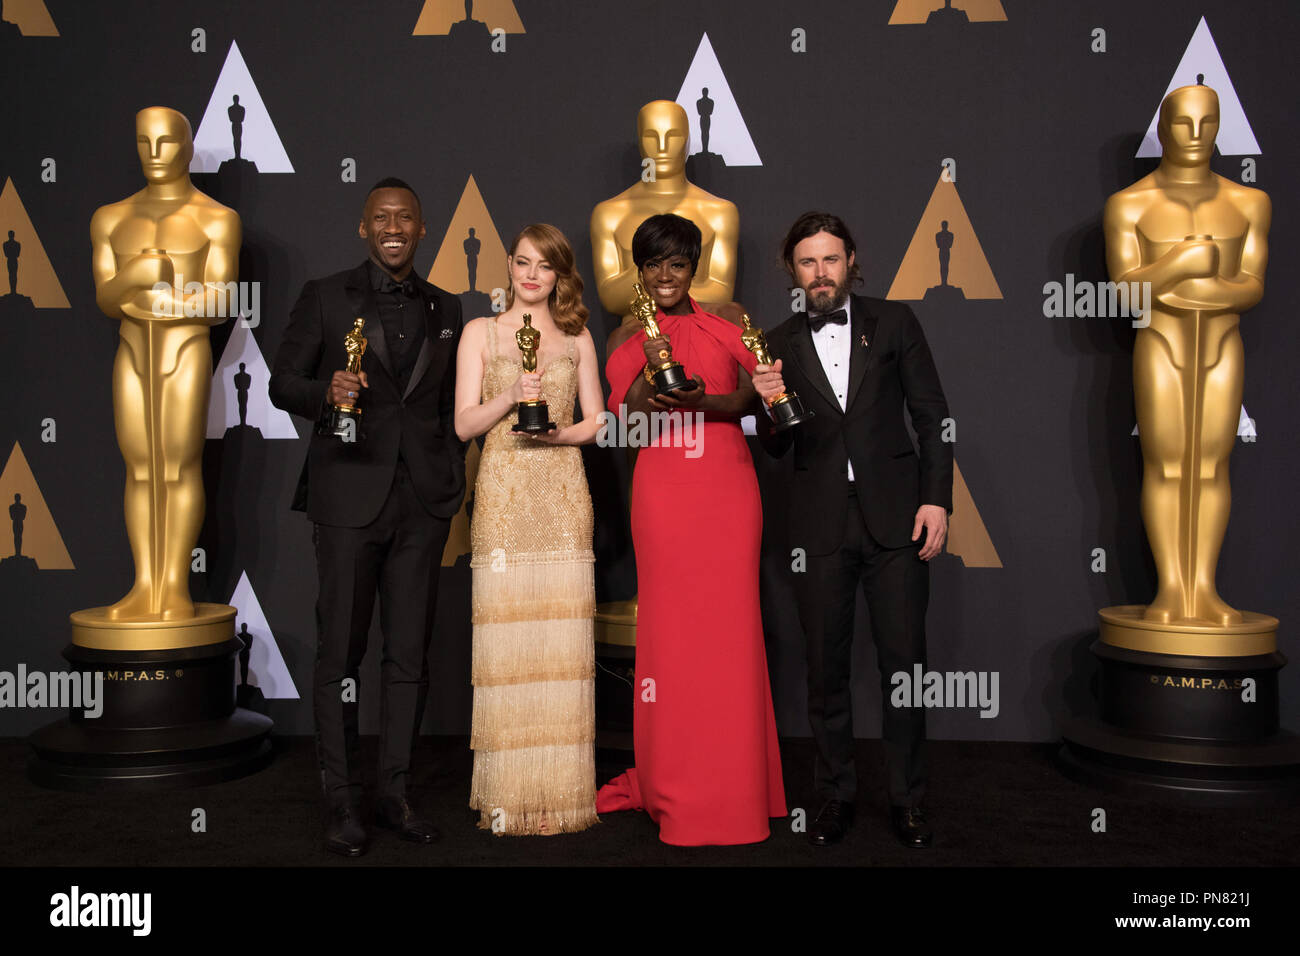 Backstage posing with their Oscars®, Mahershala Ali, Actor in a Supporting Role; Emma Stone, Actress in a Leading Role; Viola Davis, Actress in a Supporting Role; and Casey Affleck, Actor in a Leading Role backstage during The 89th Oscars® at the Dolby® Theatre in Hollywood, CA on Sunday, February 26, 2017.  File Reference # 33242 554THA  For Editorial Use Only -  All Rights Reserved Stock Photo